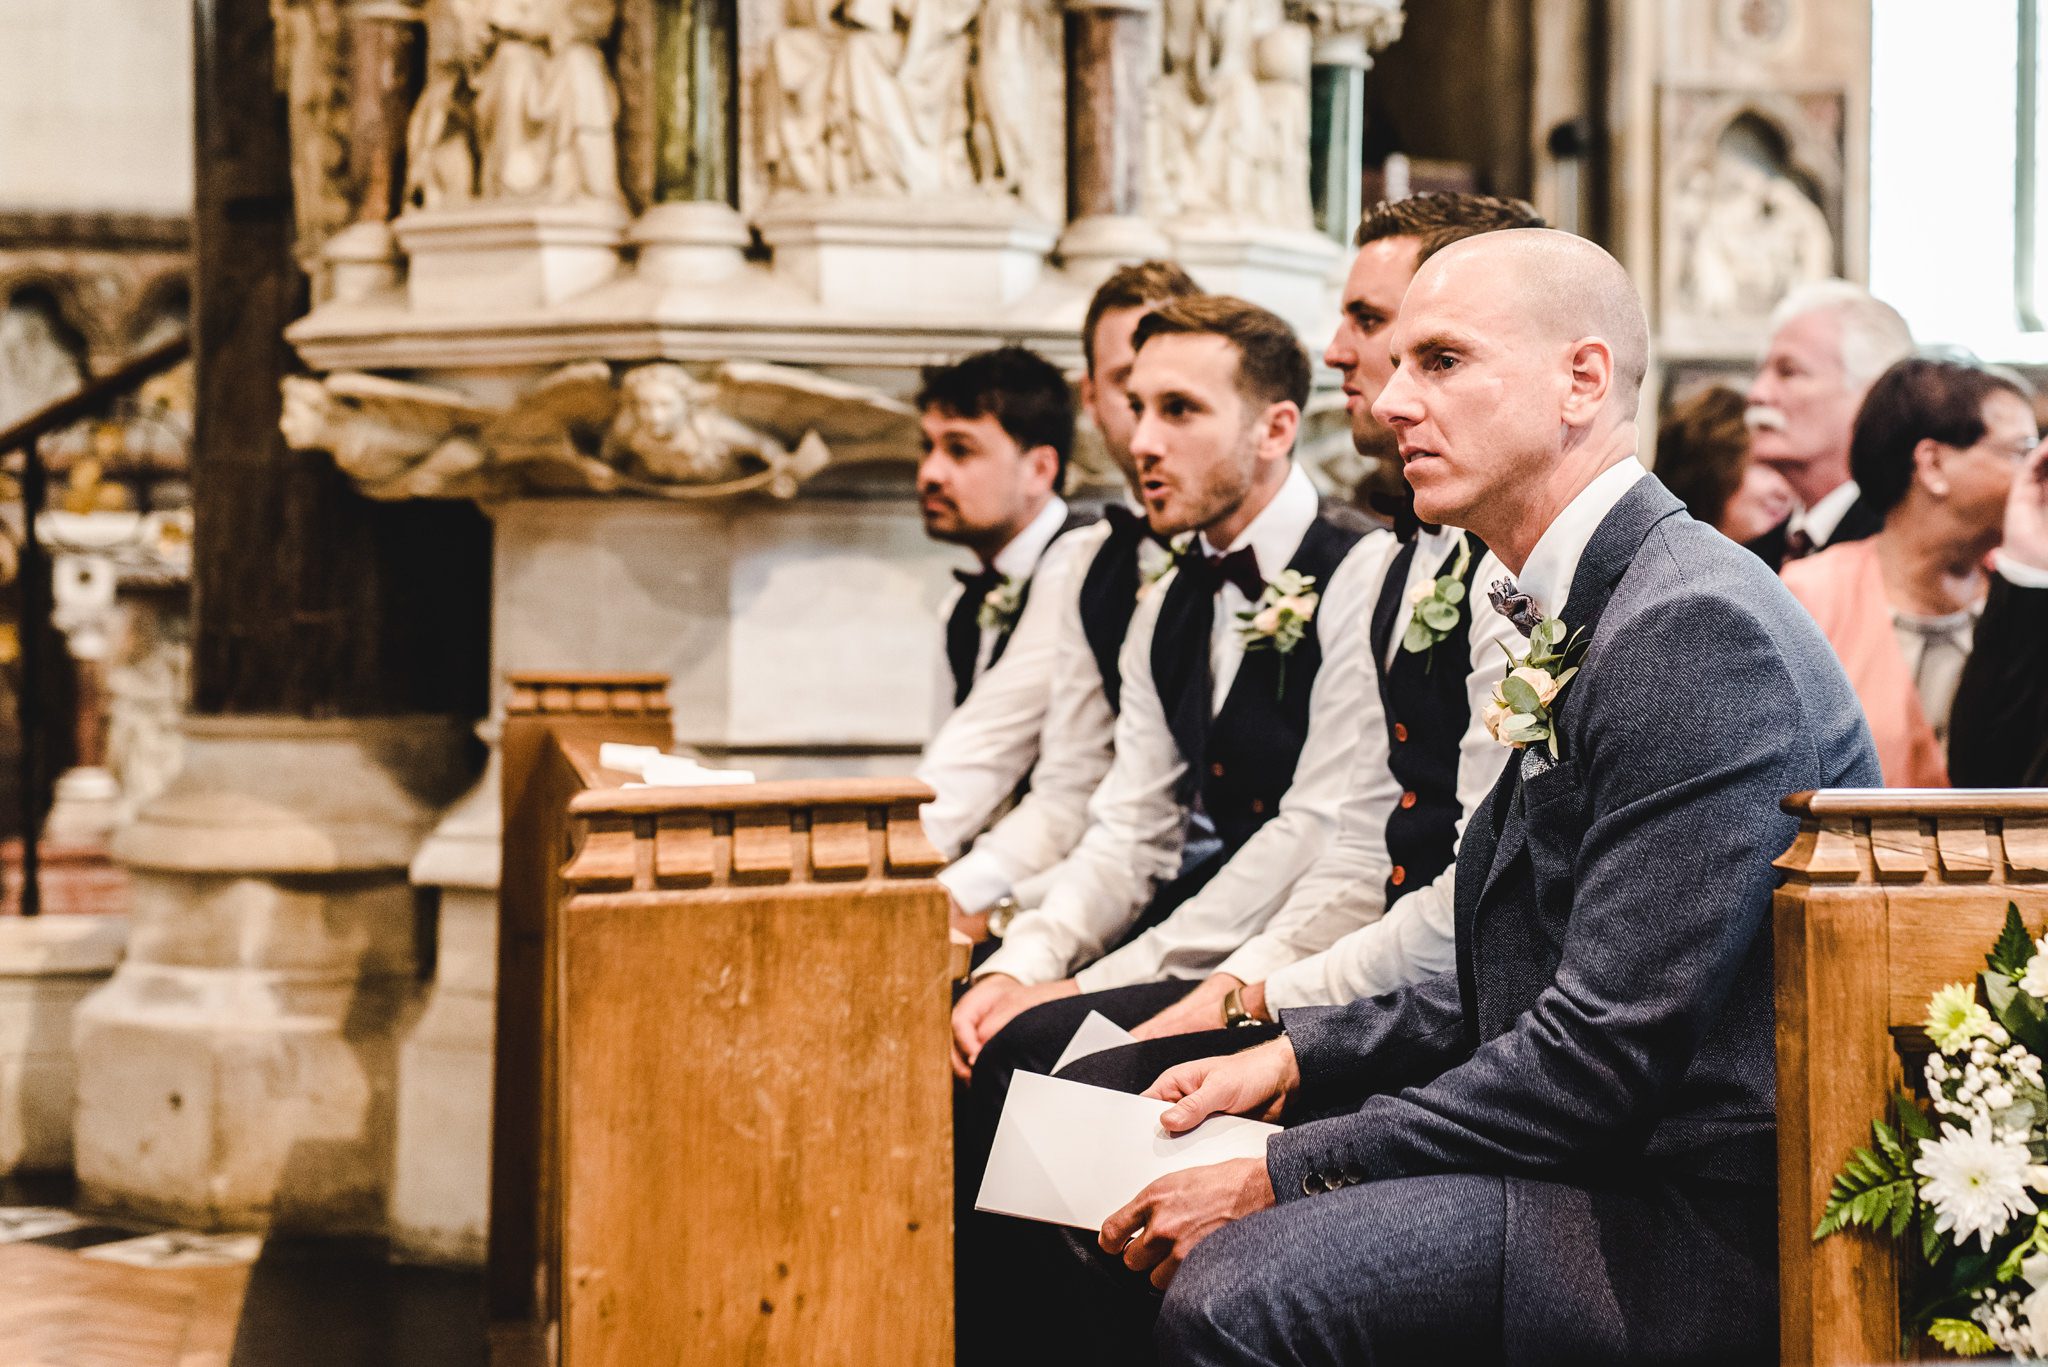 bath church wedding ceremony with a very nervous looking groom